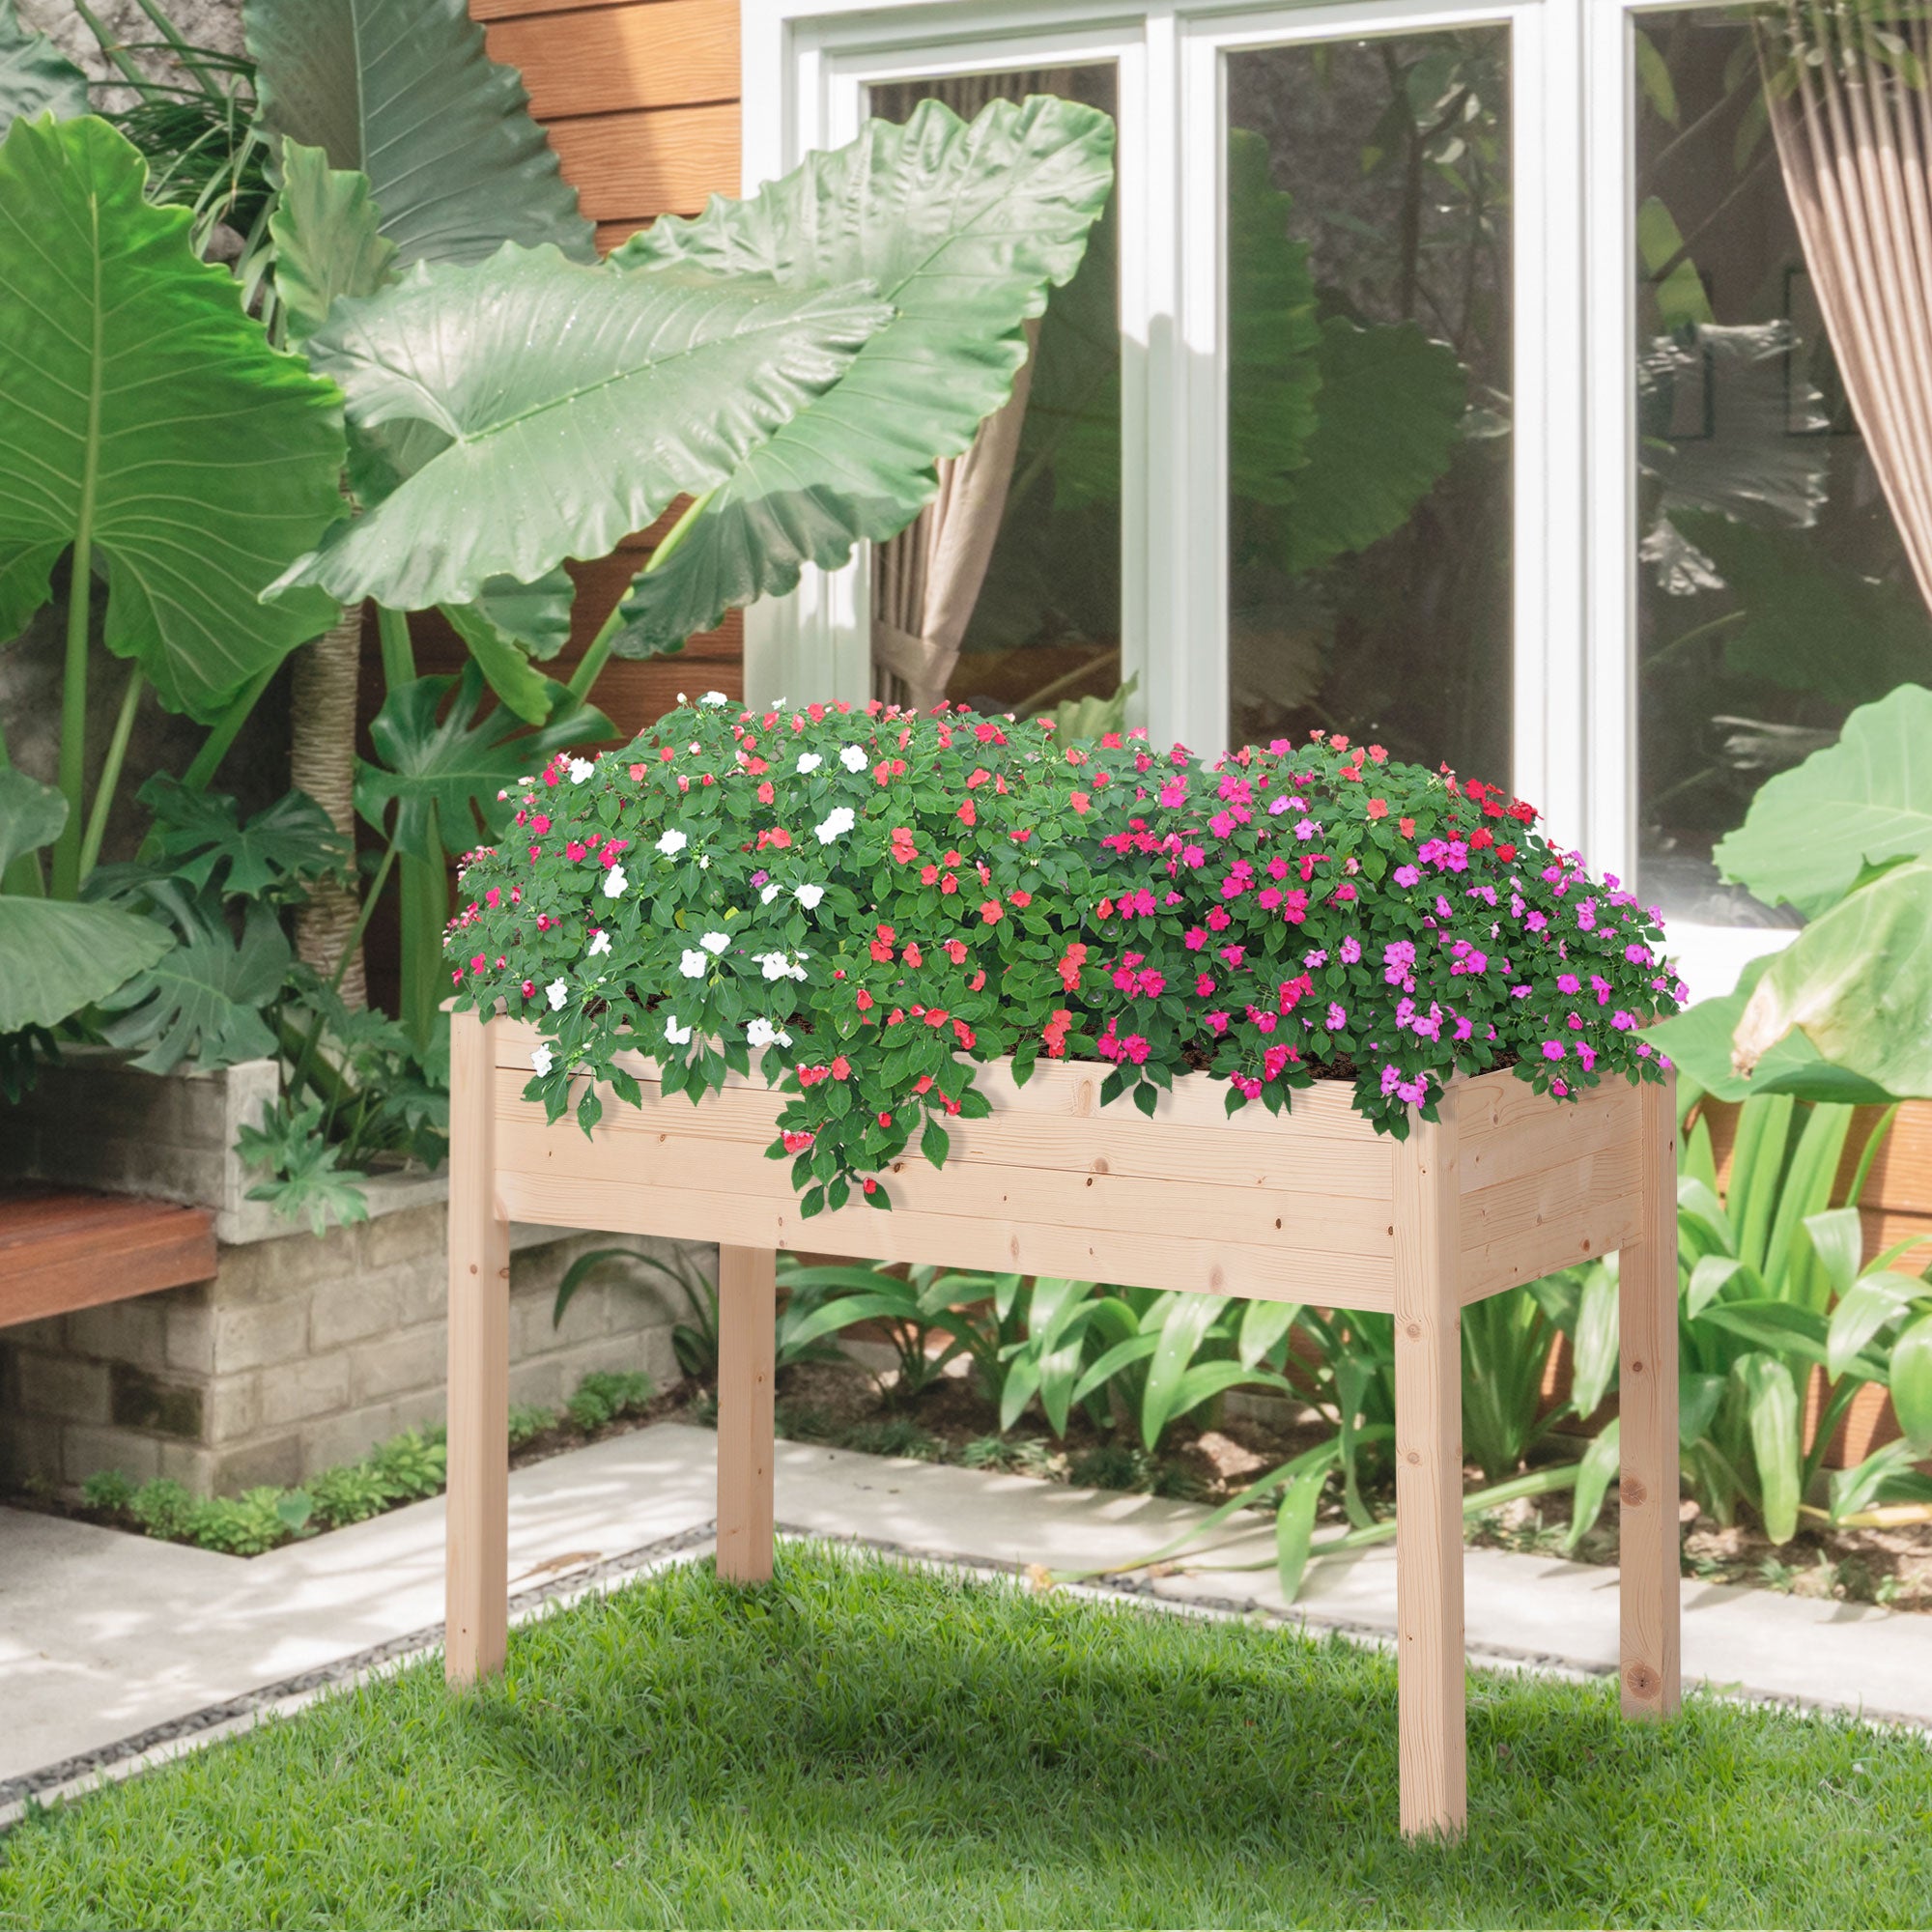 Outsunny Garden Rectangular Wooden Planter Flower Elevated Raised Bed Stand Pot Outdoor Planter Vegetable Herb Holder - 76H x 122.5L x 56.5Wcm - Inspirely